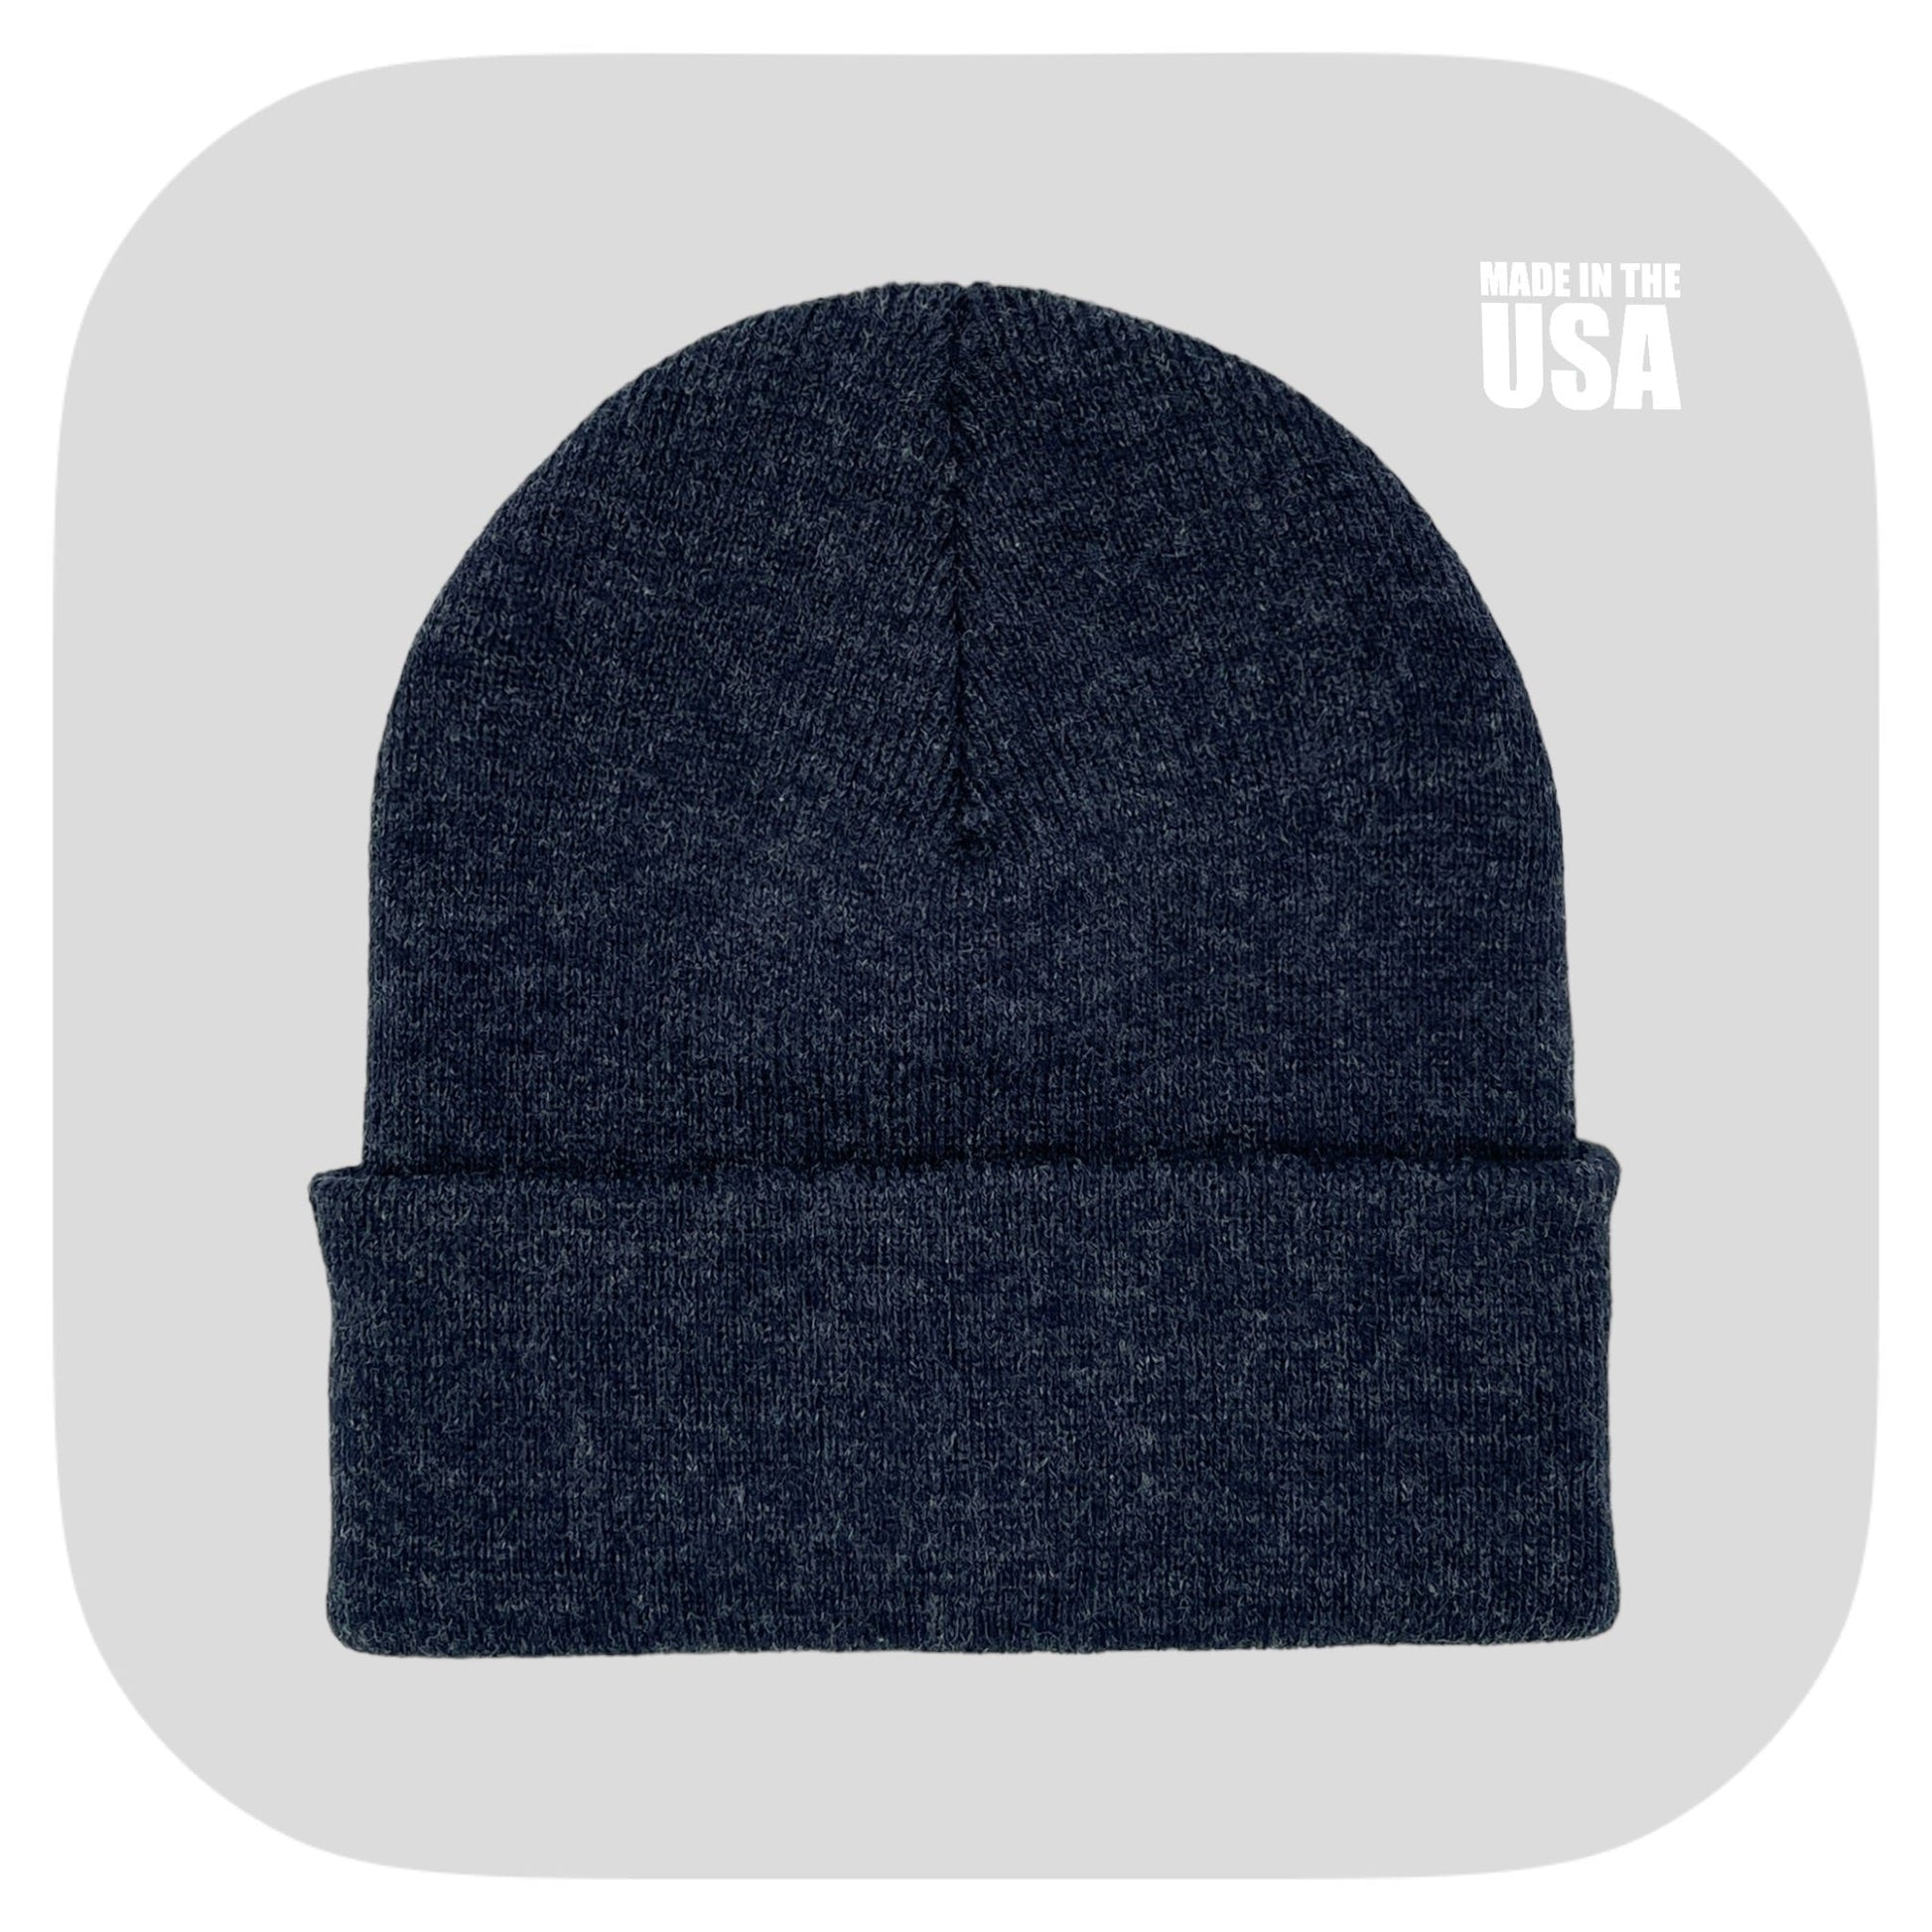 Blank Beanie Factory Cuffed Winter Hat, Wholesale price, Premium Quality, Orange, Made in U.S.A - The Beanie Factory